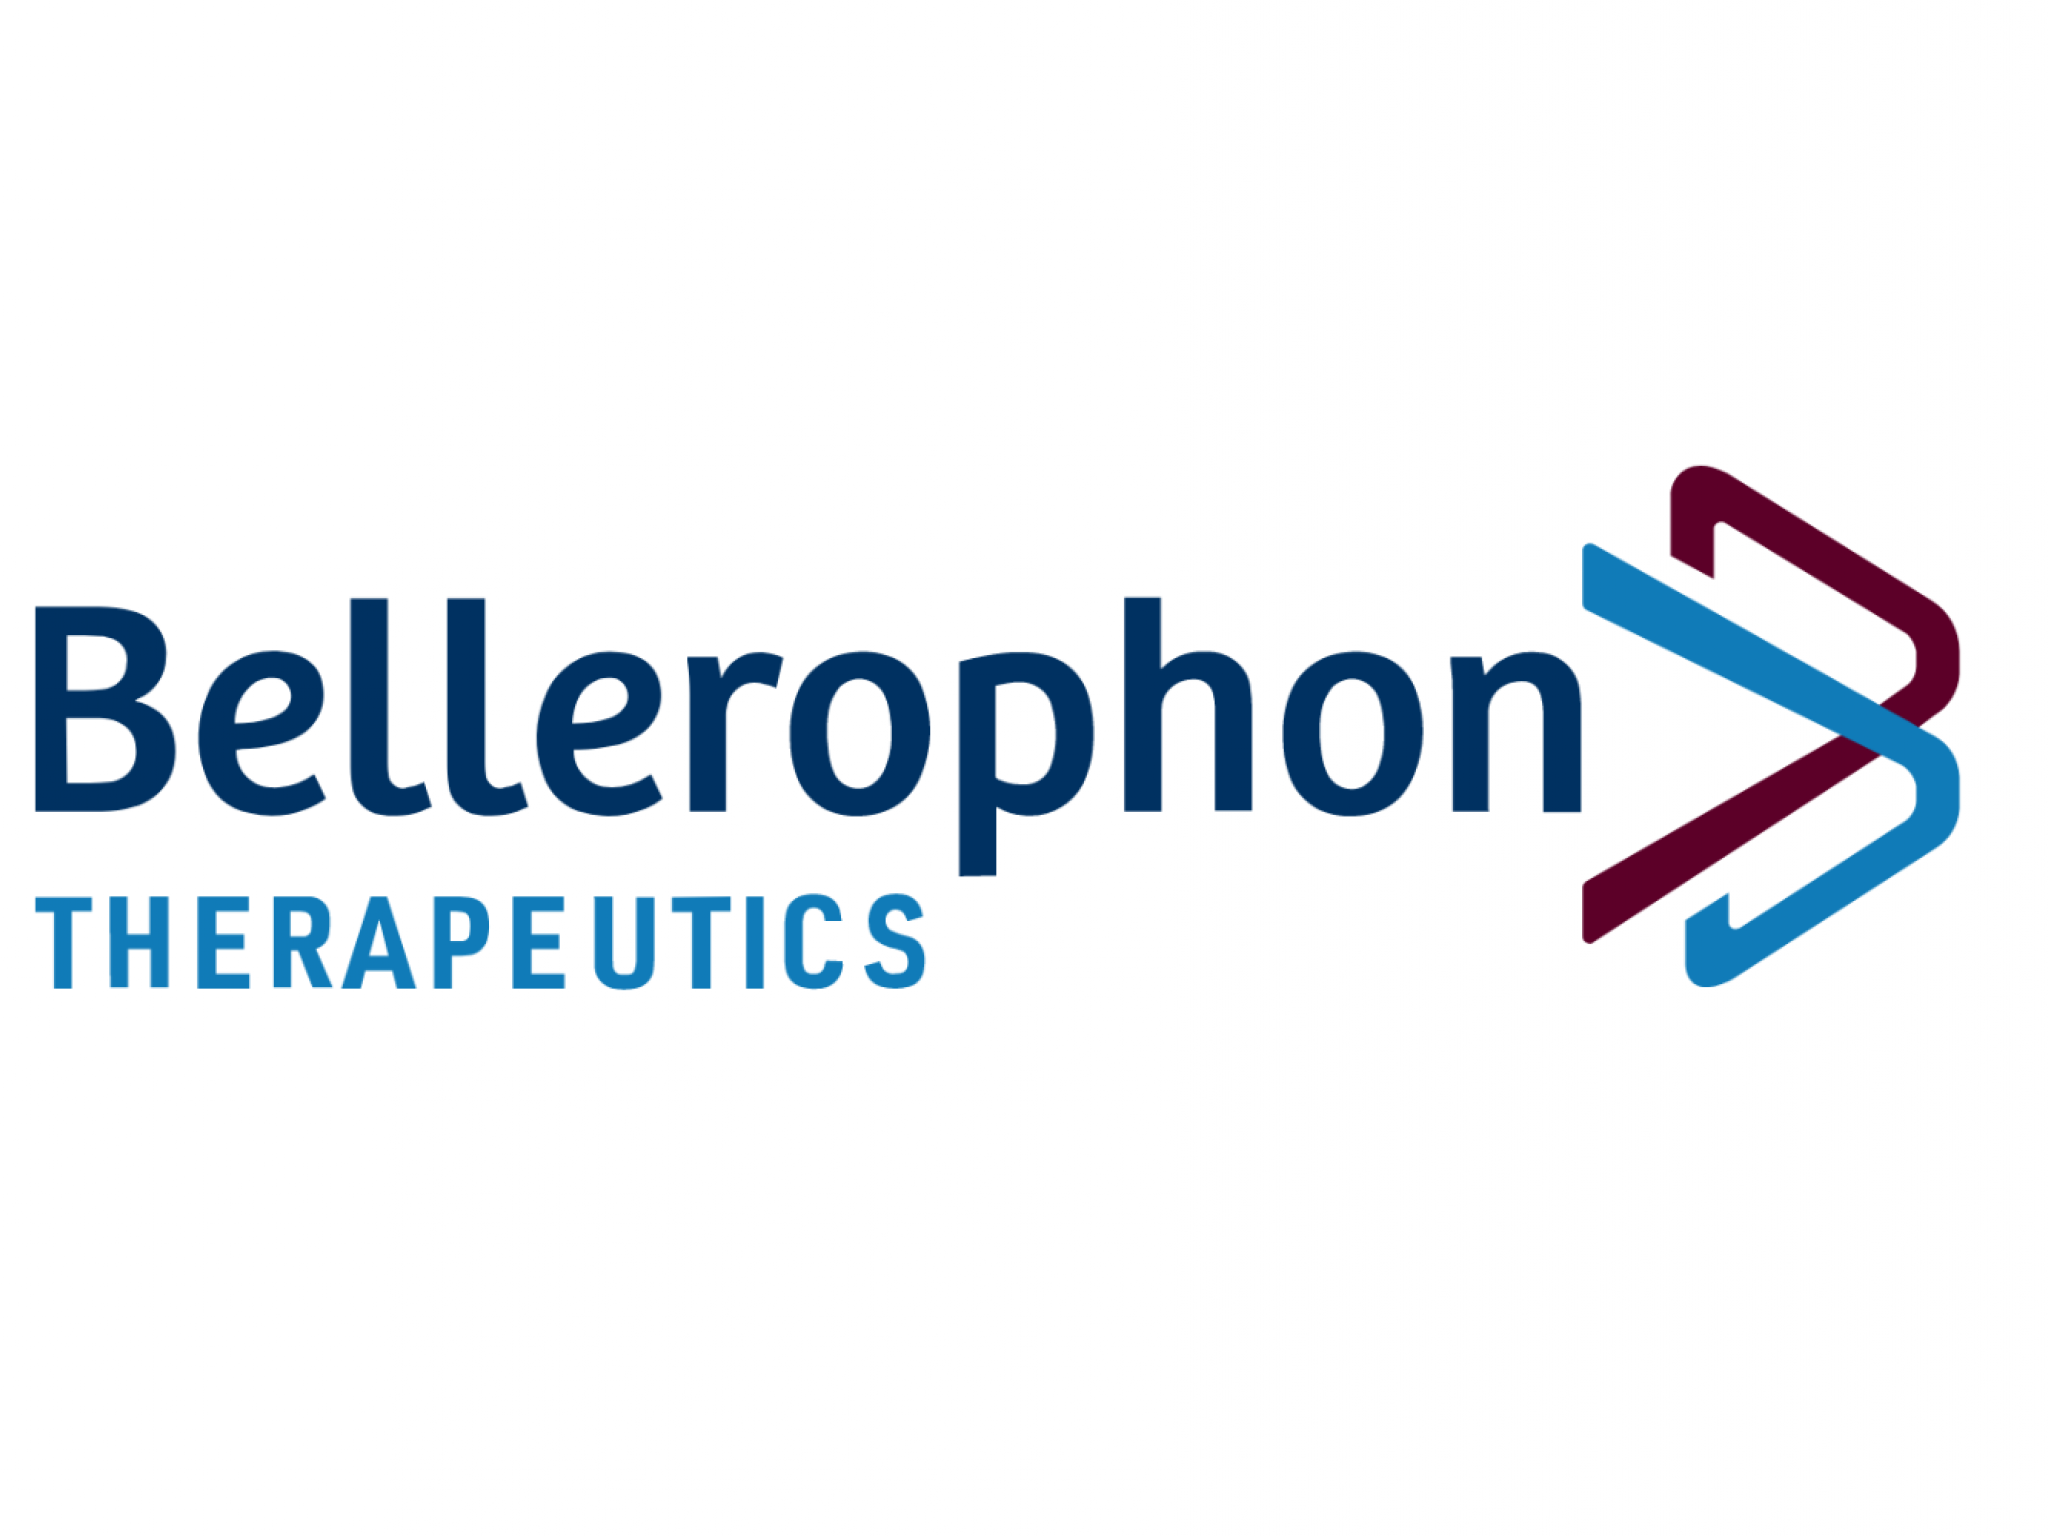  whats-happening-with-bellerophon-therapeutics-stock-today 